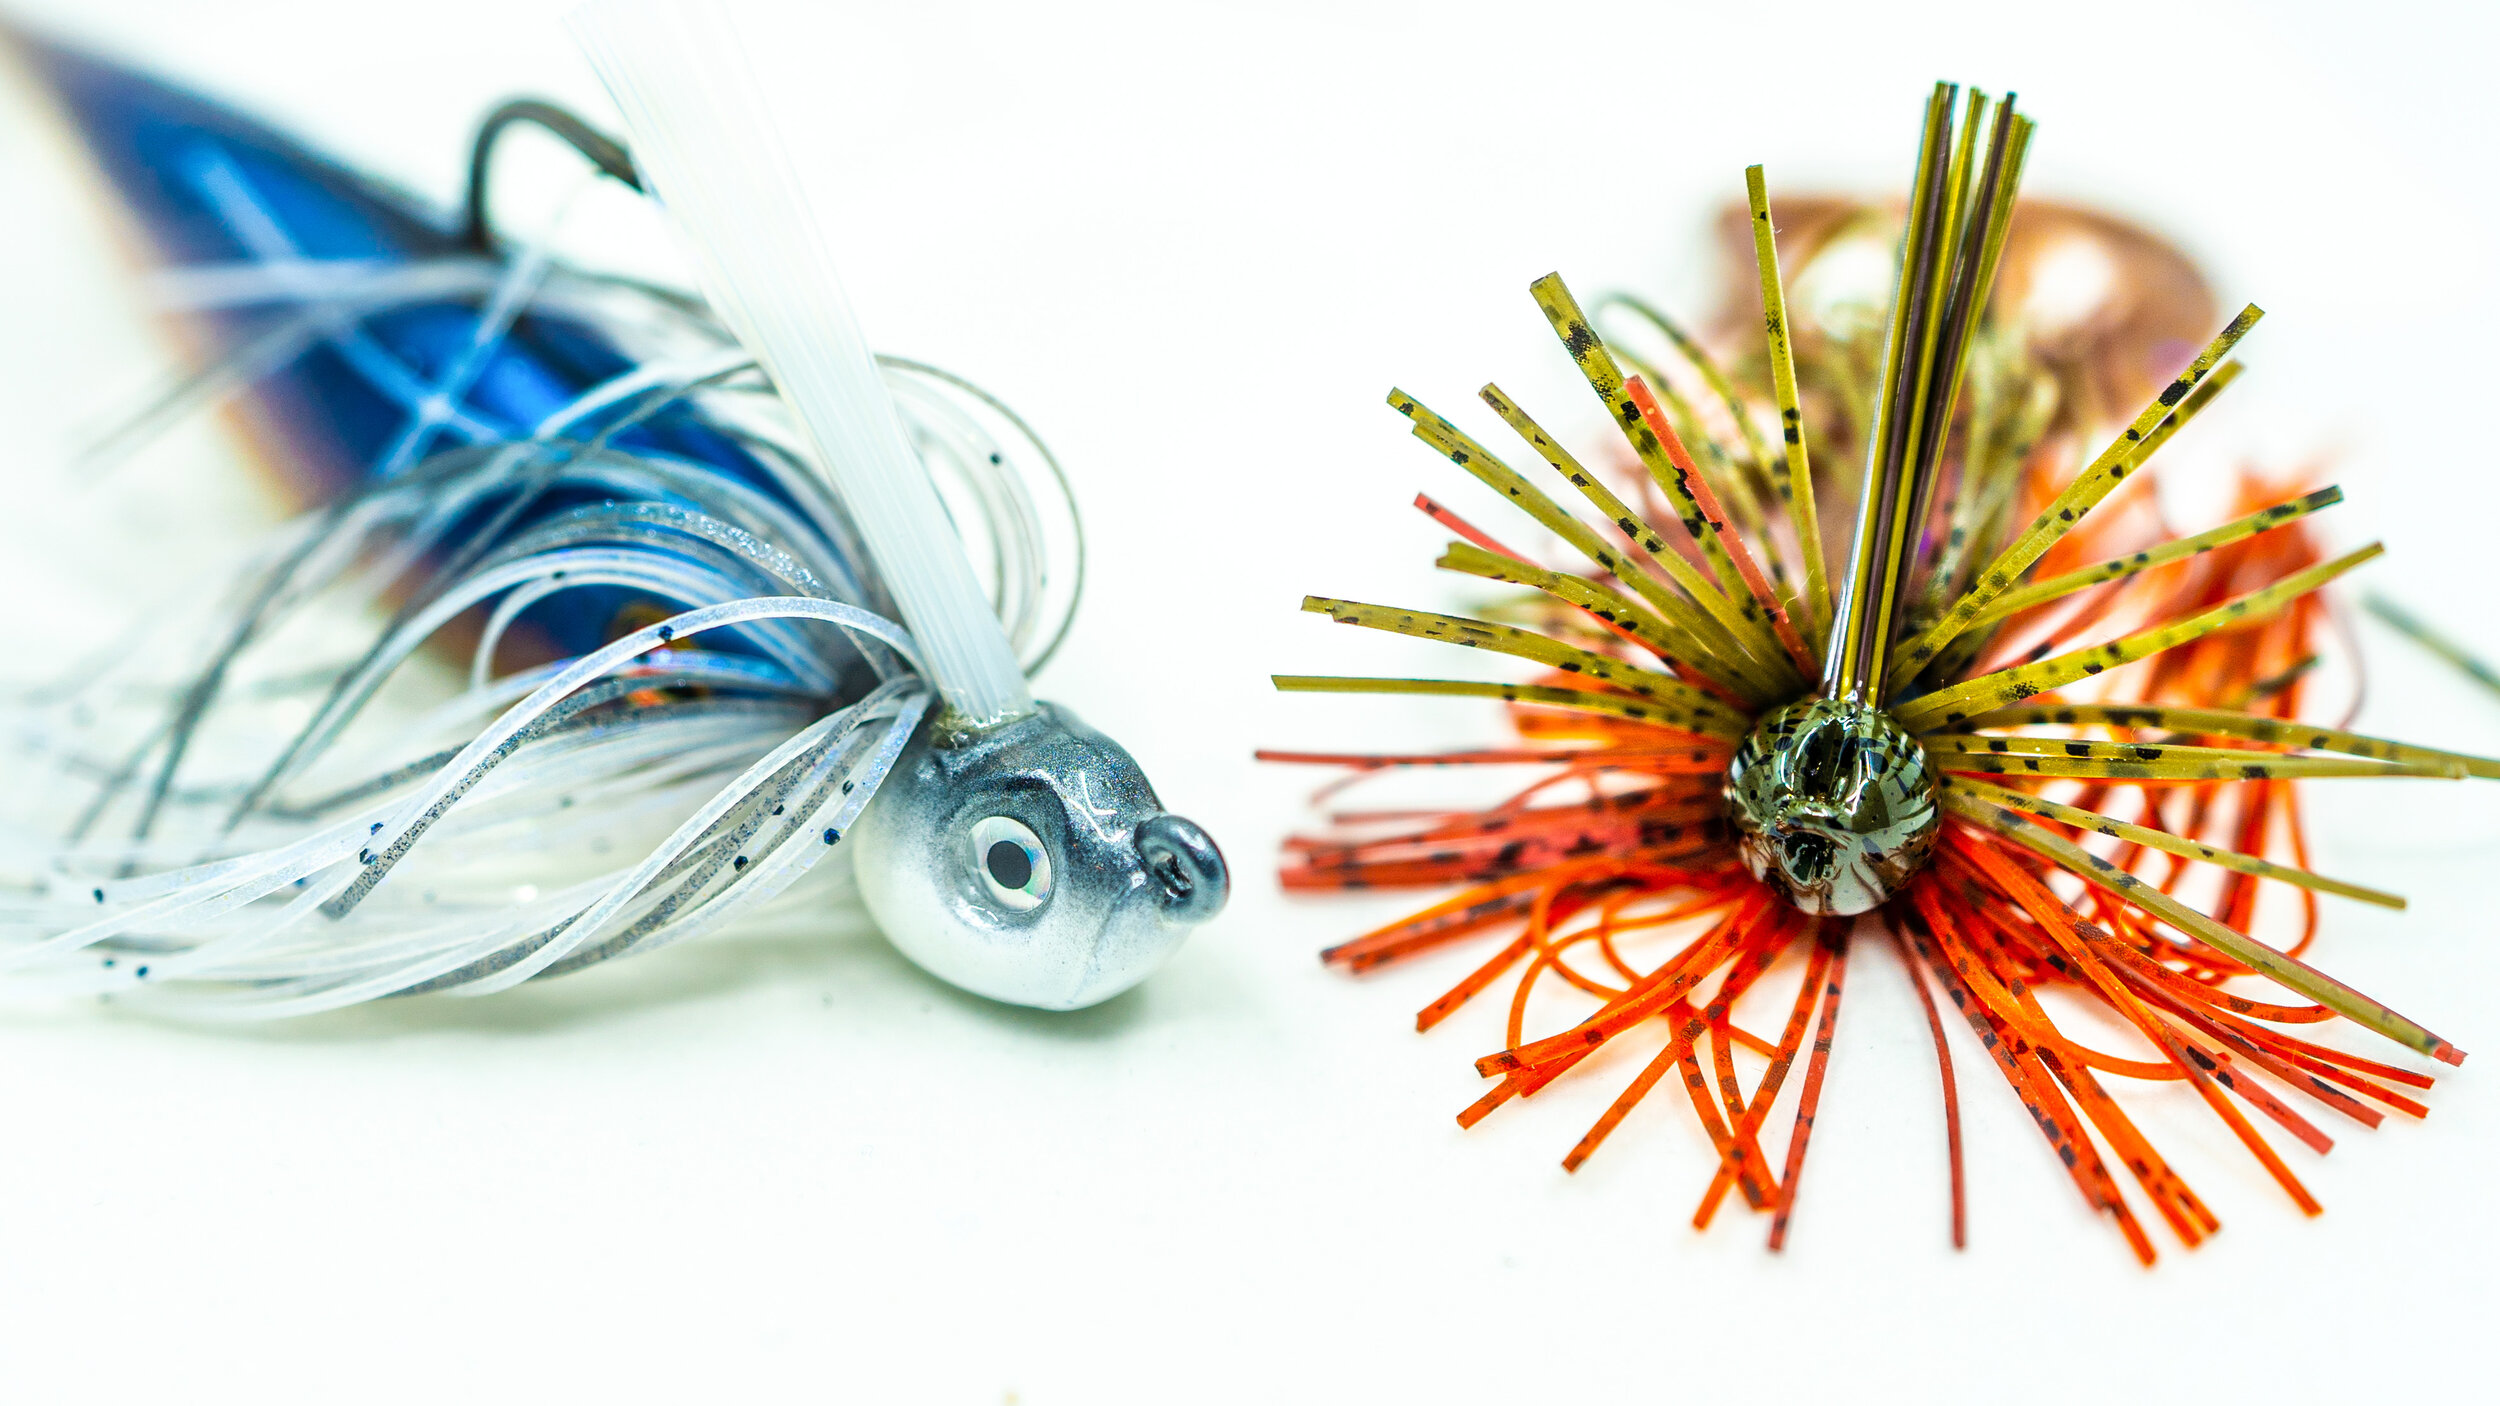 Make Skirted Bass Fishing Jigs Better with These Modifications